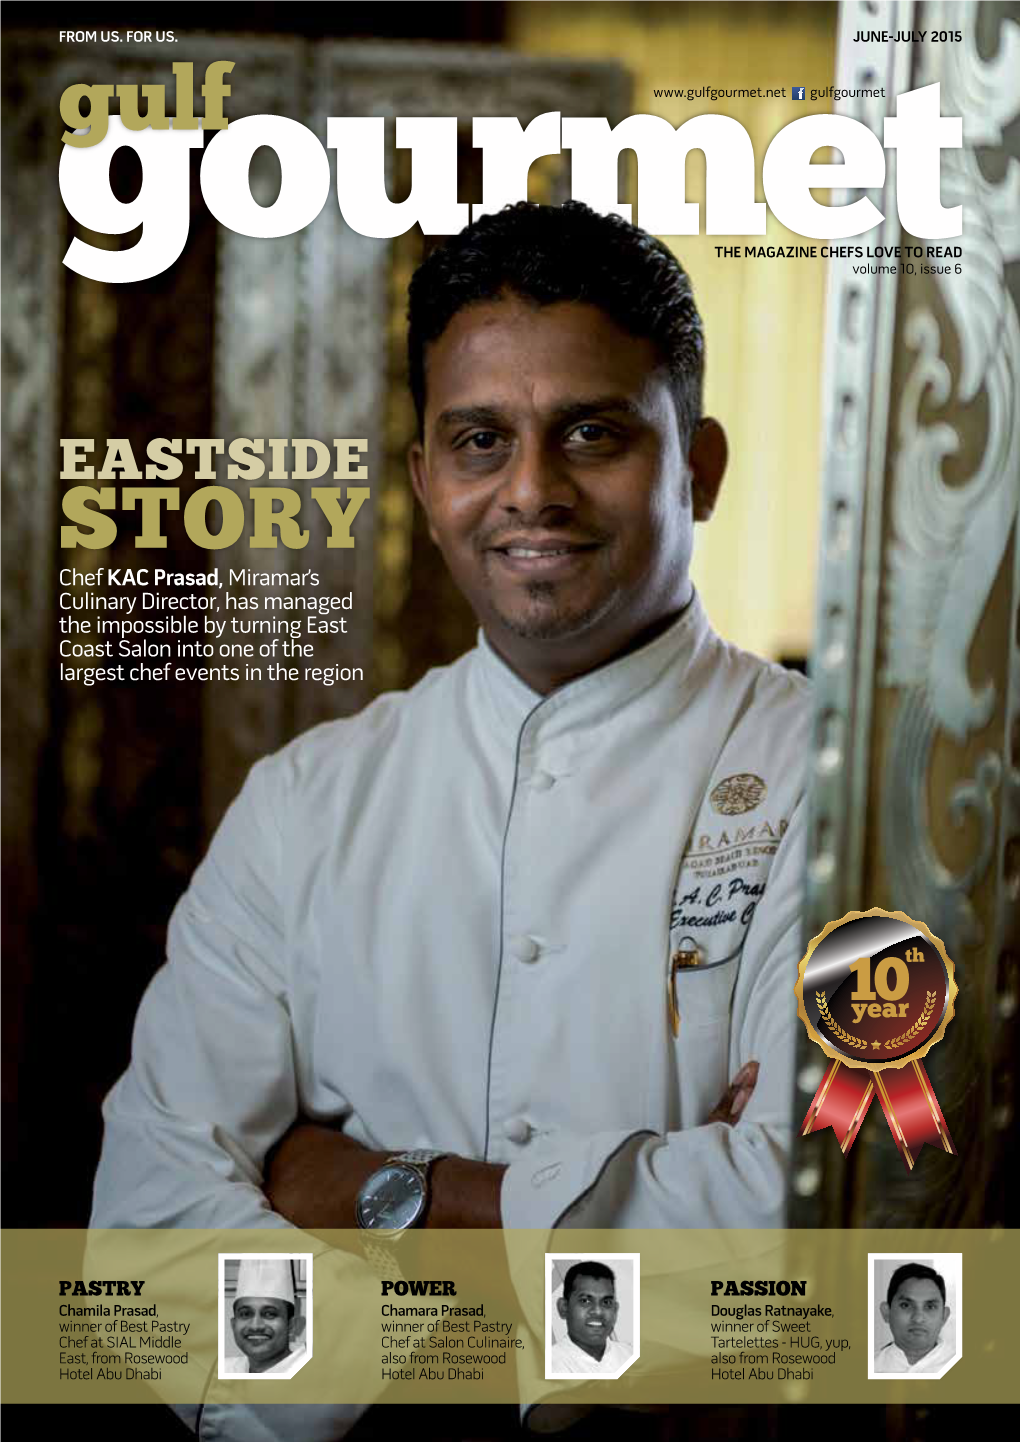 EASTSIDE STORY Chef KAC Prasad, Miramar’S Culinary Director, Has Managed the Impossible by Turning East Coast Salon Into One of the Largest Chef Events in the Region